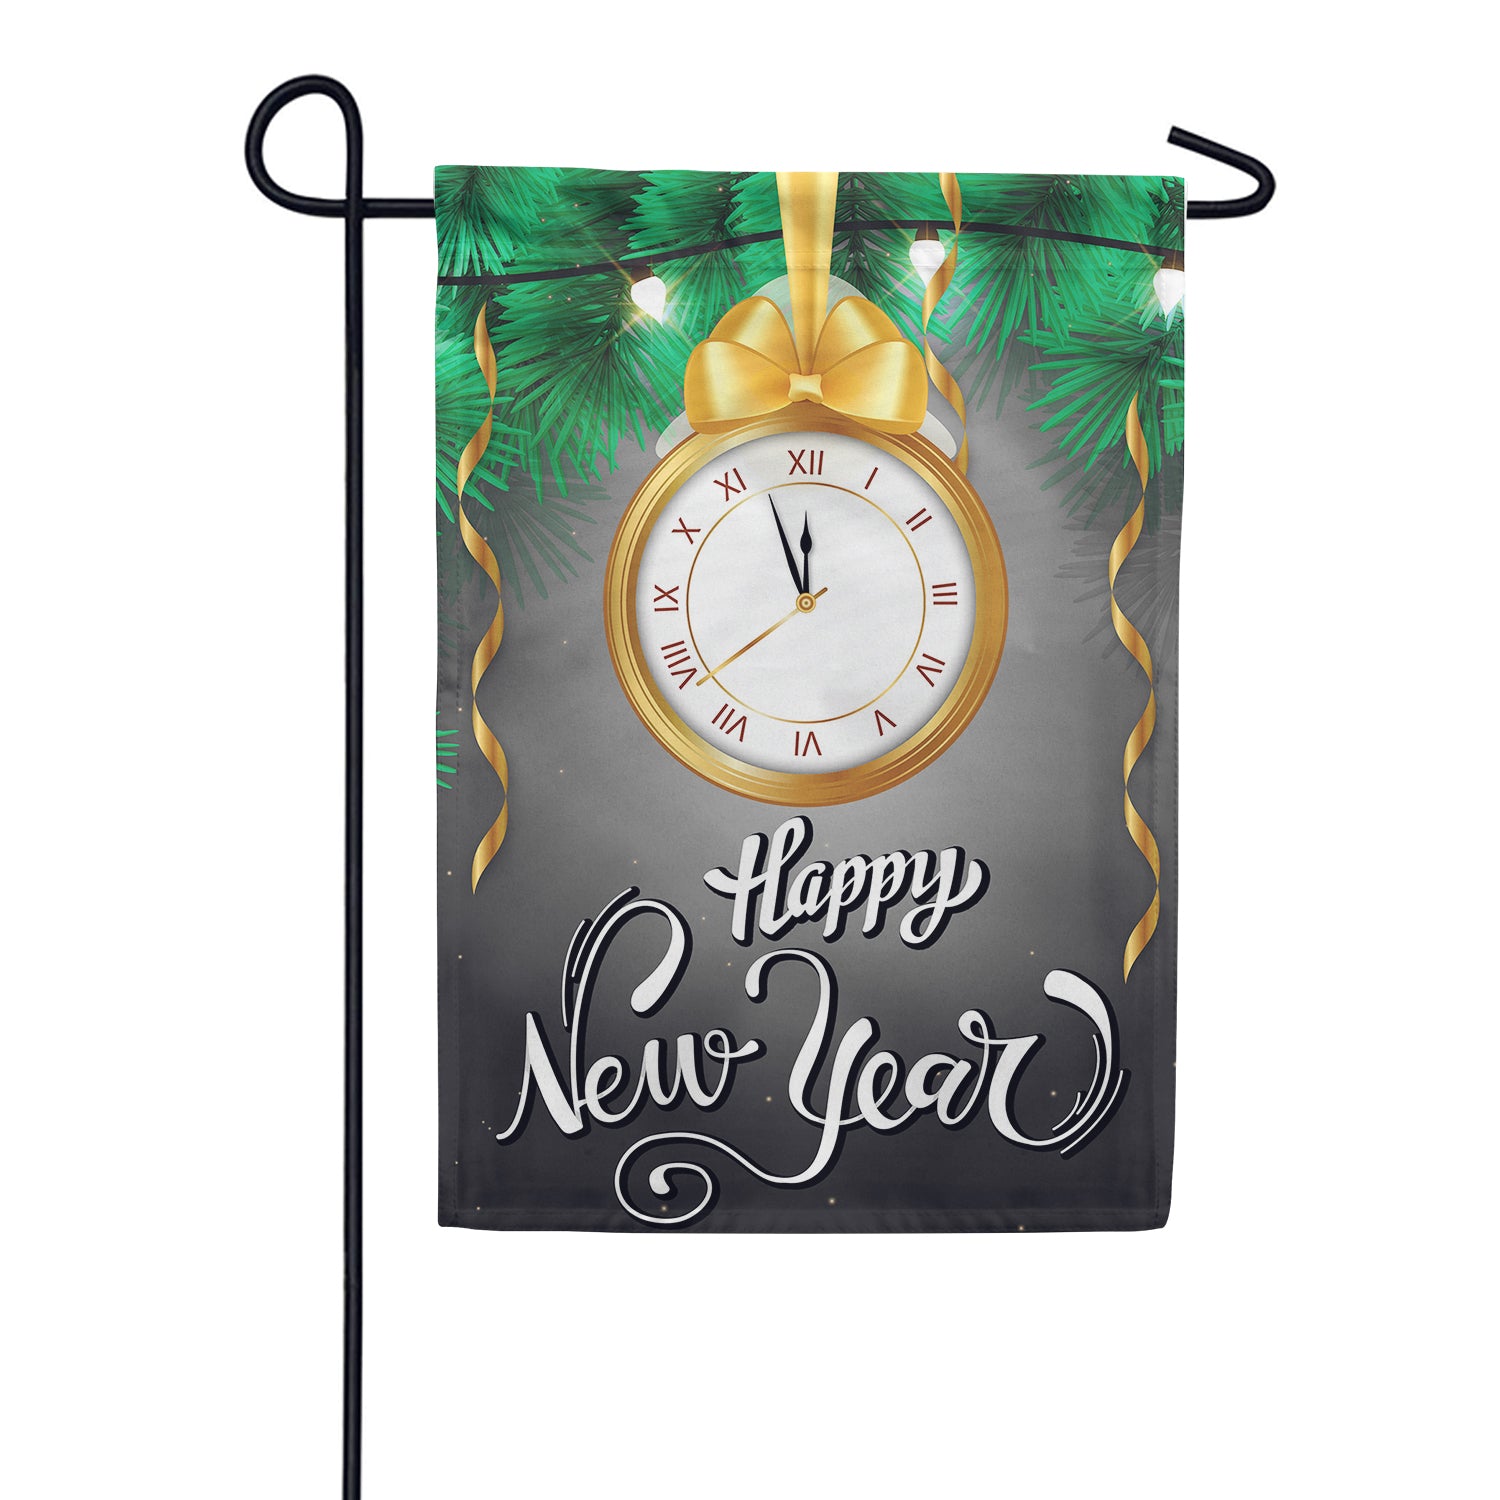 3-2-1- Happy New Year! Double Sided Garden Flag